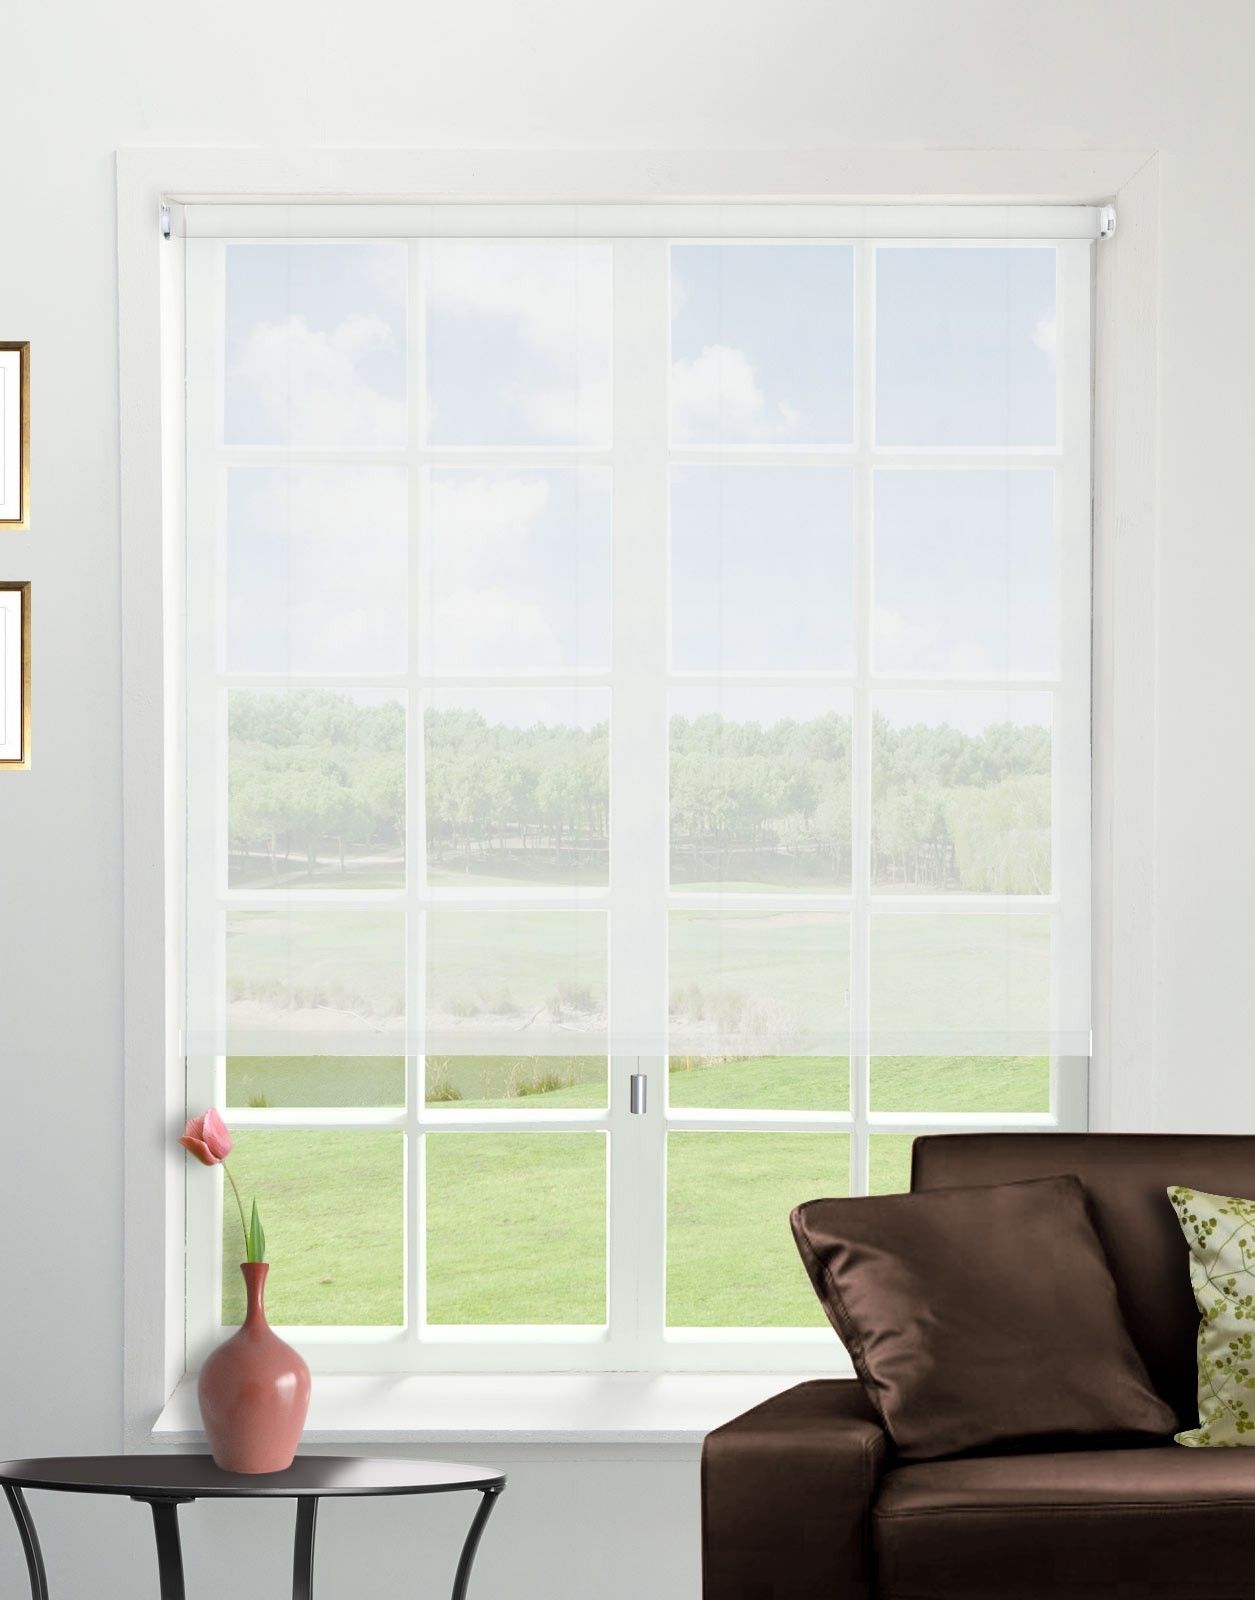 Voile White Roller Blind Direct Order Blinds Uk Within Voile Blinds (View 5 of 15)